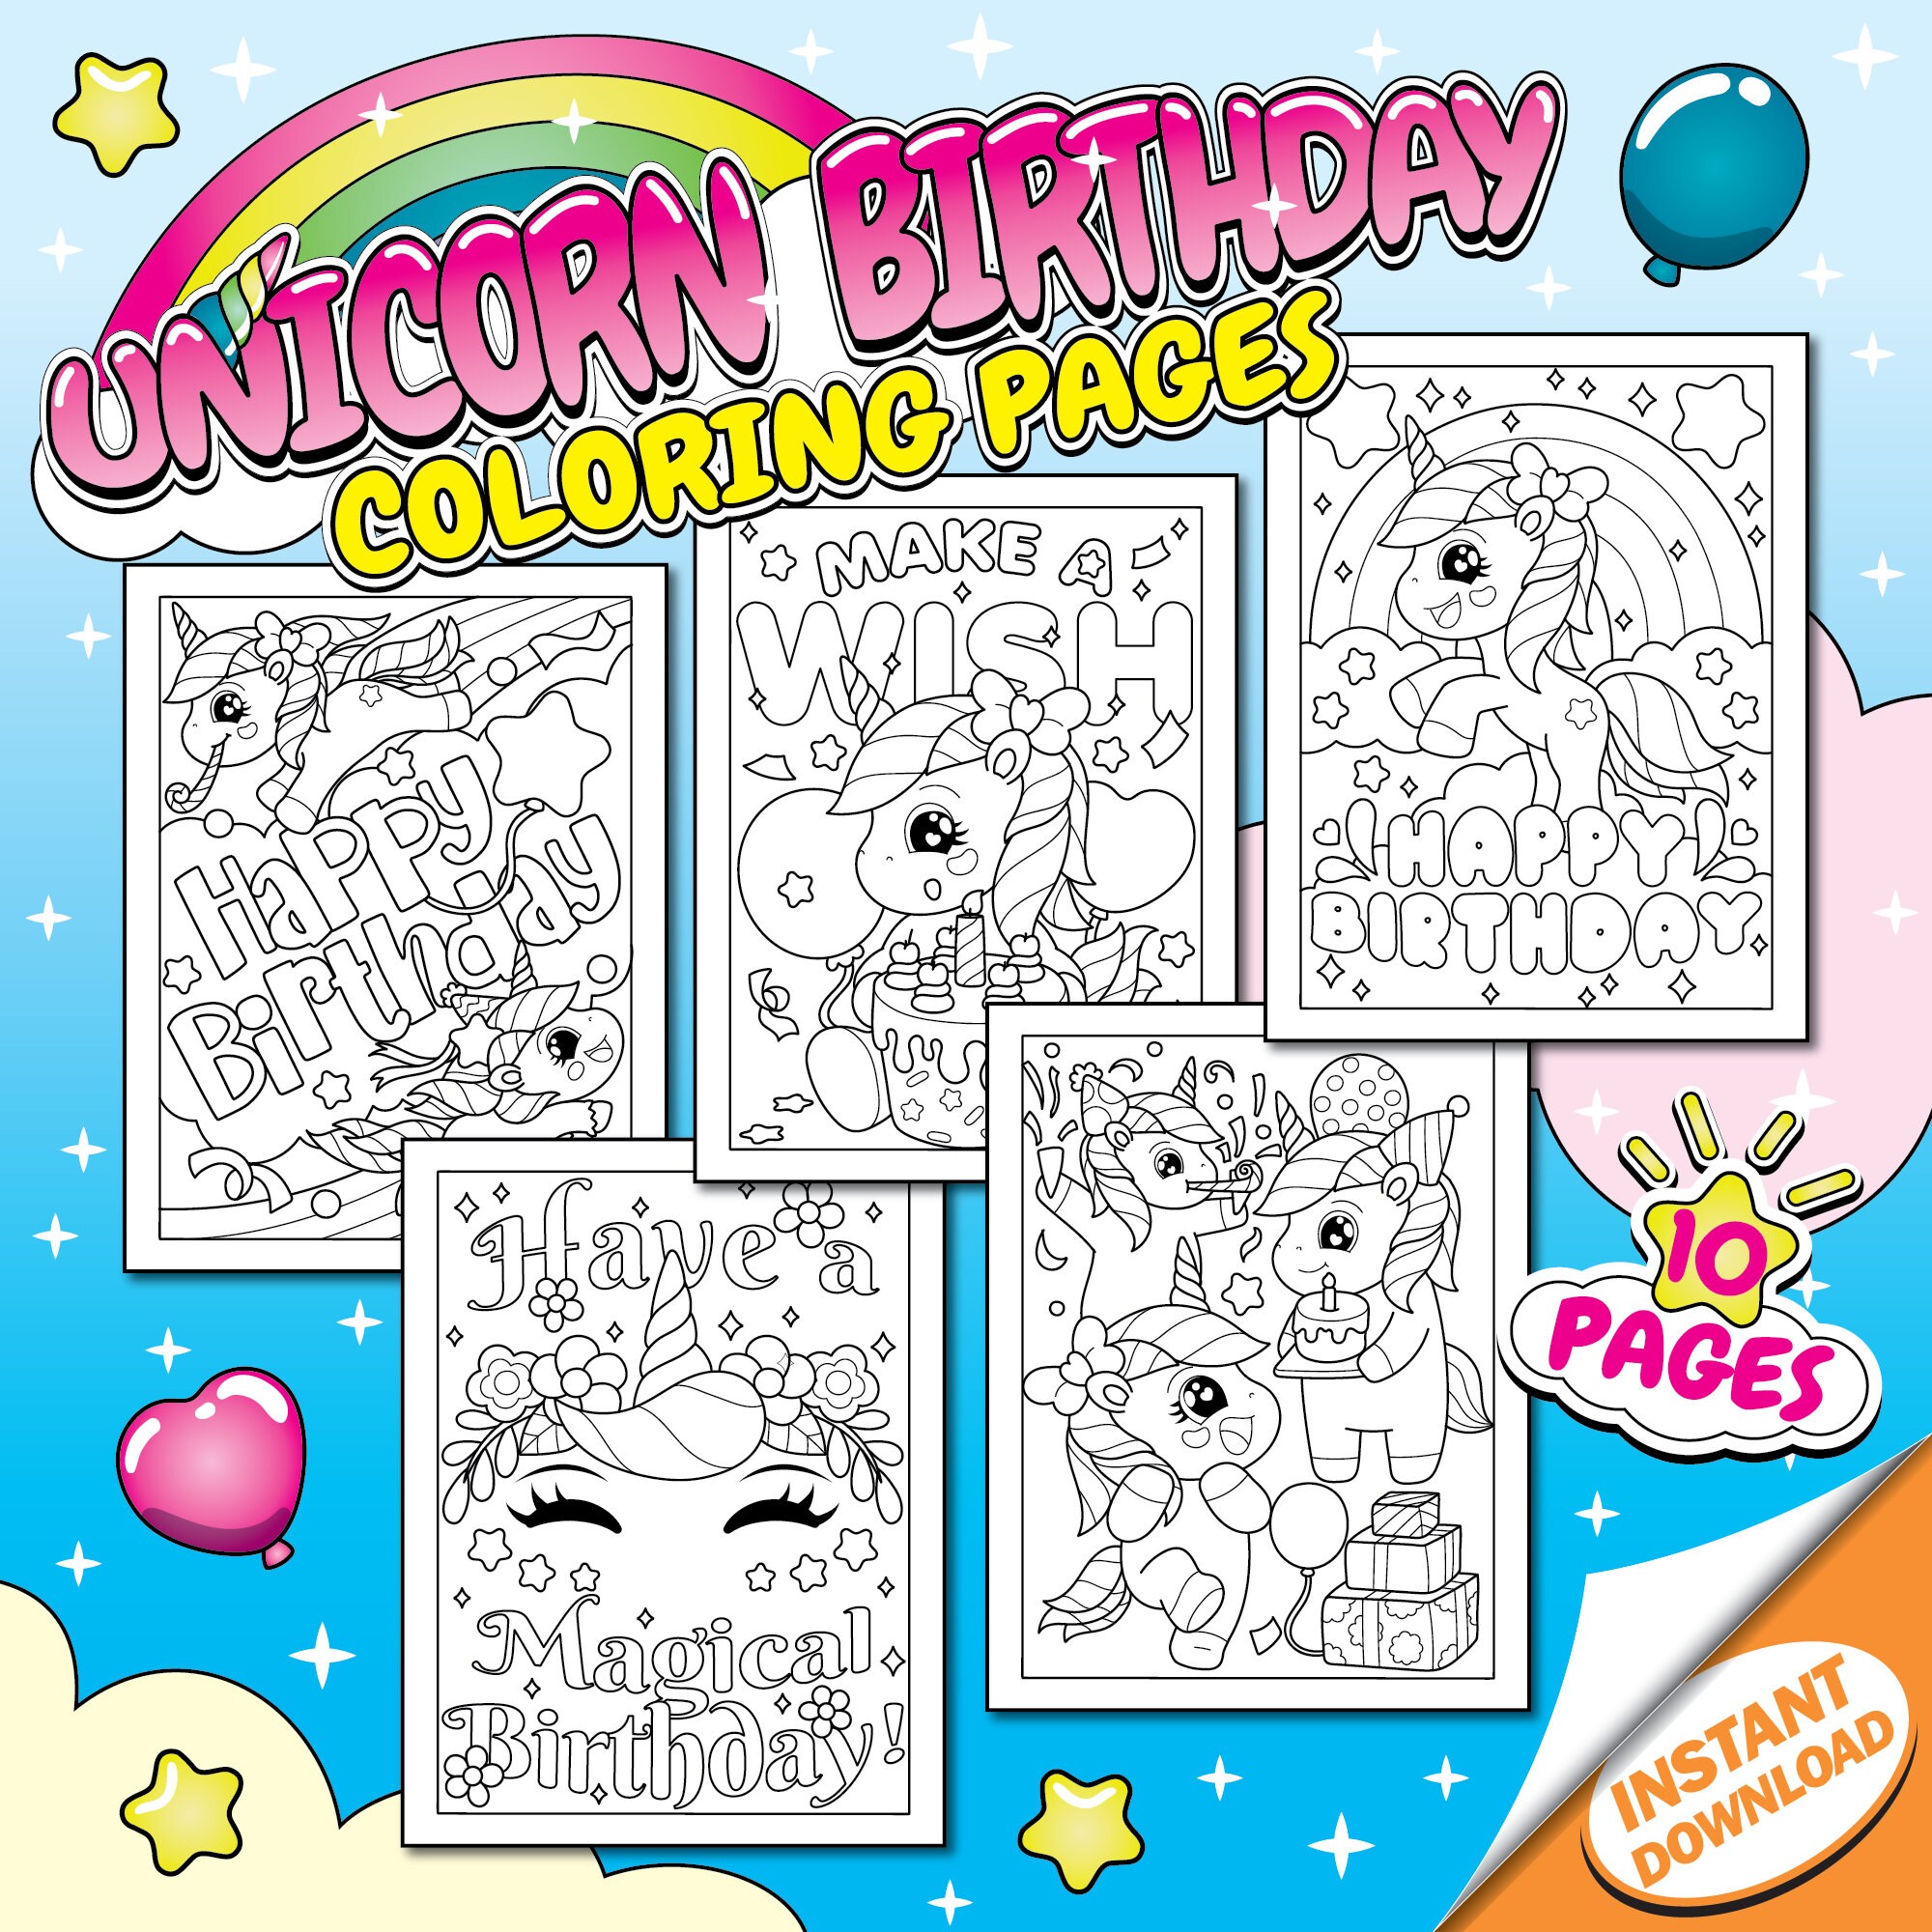 Happy Birthday Unicorn Coloring Pages for Girls Celebration Party, Cute Printable Instant Digital Download PDF Sheets Magical Illustrations